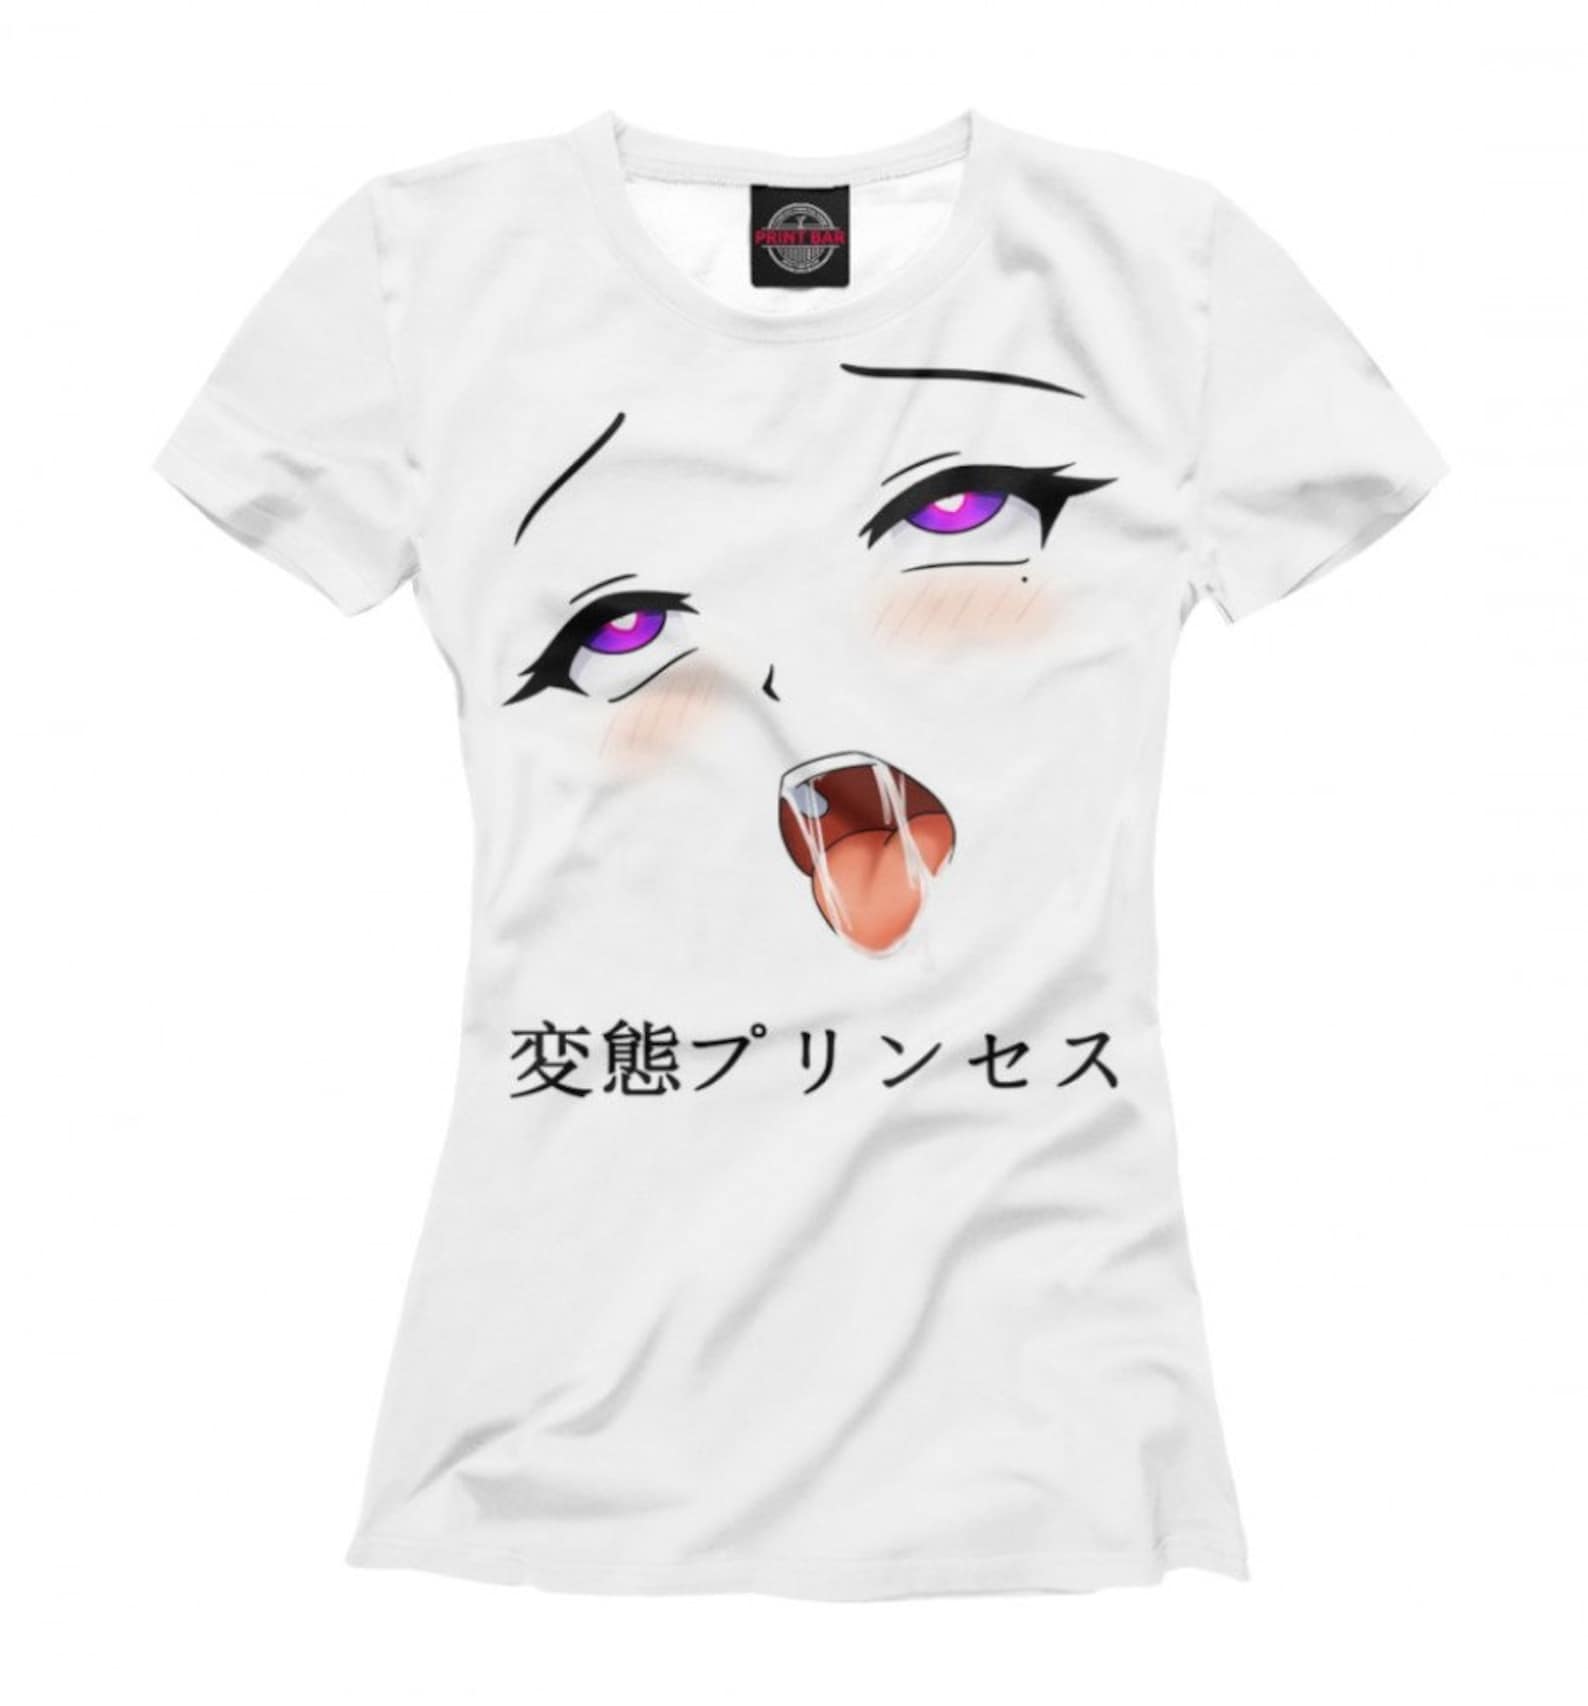 Ahegao Face T-Shirt High Quality Graphic Shirt Men's | Etsy